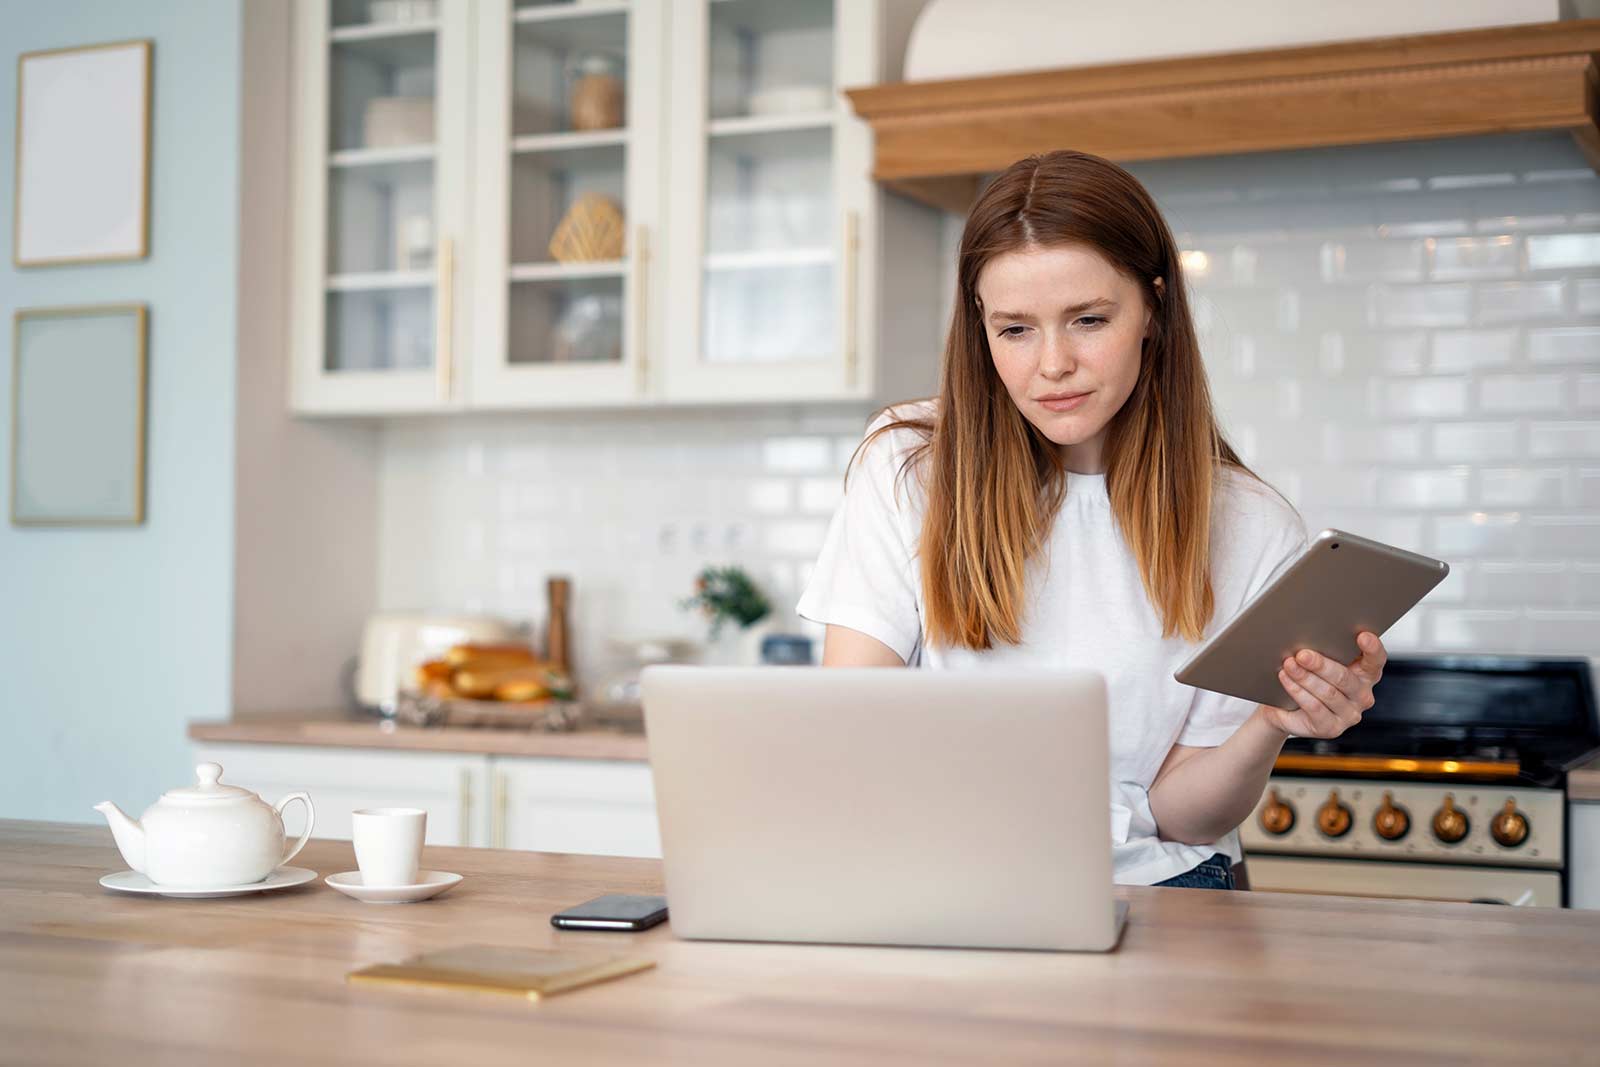 Young woman in her kitchen using her laptop and tablet to do online research